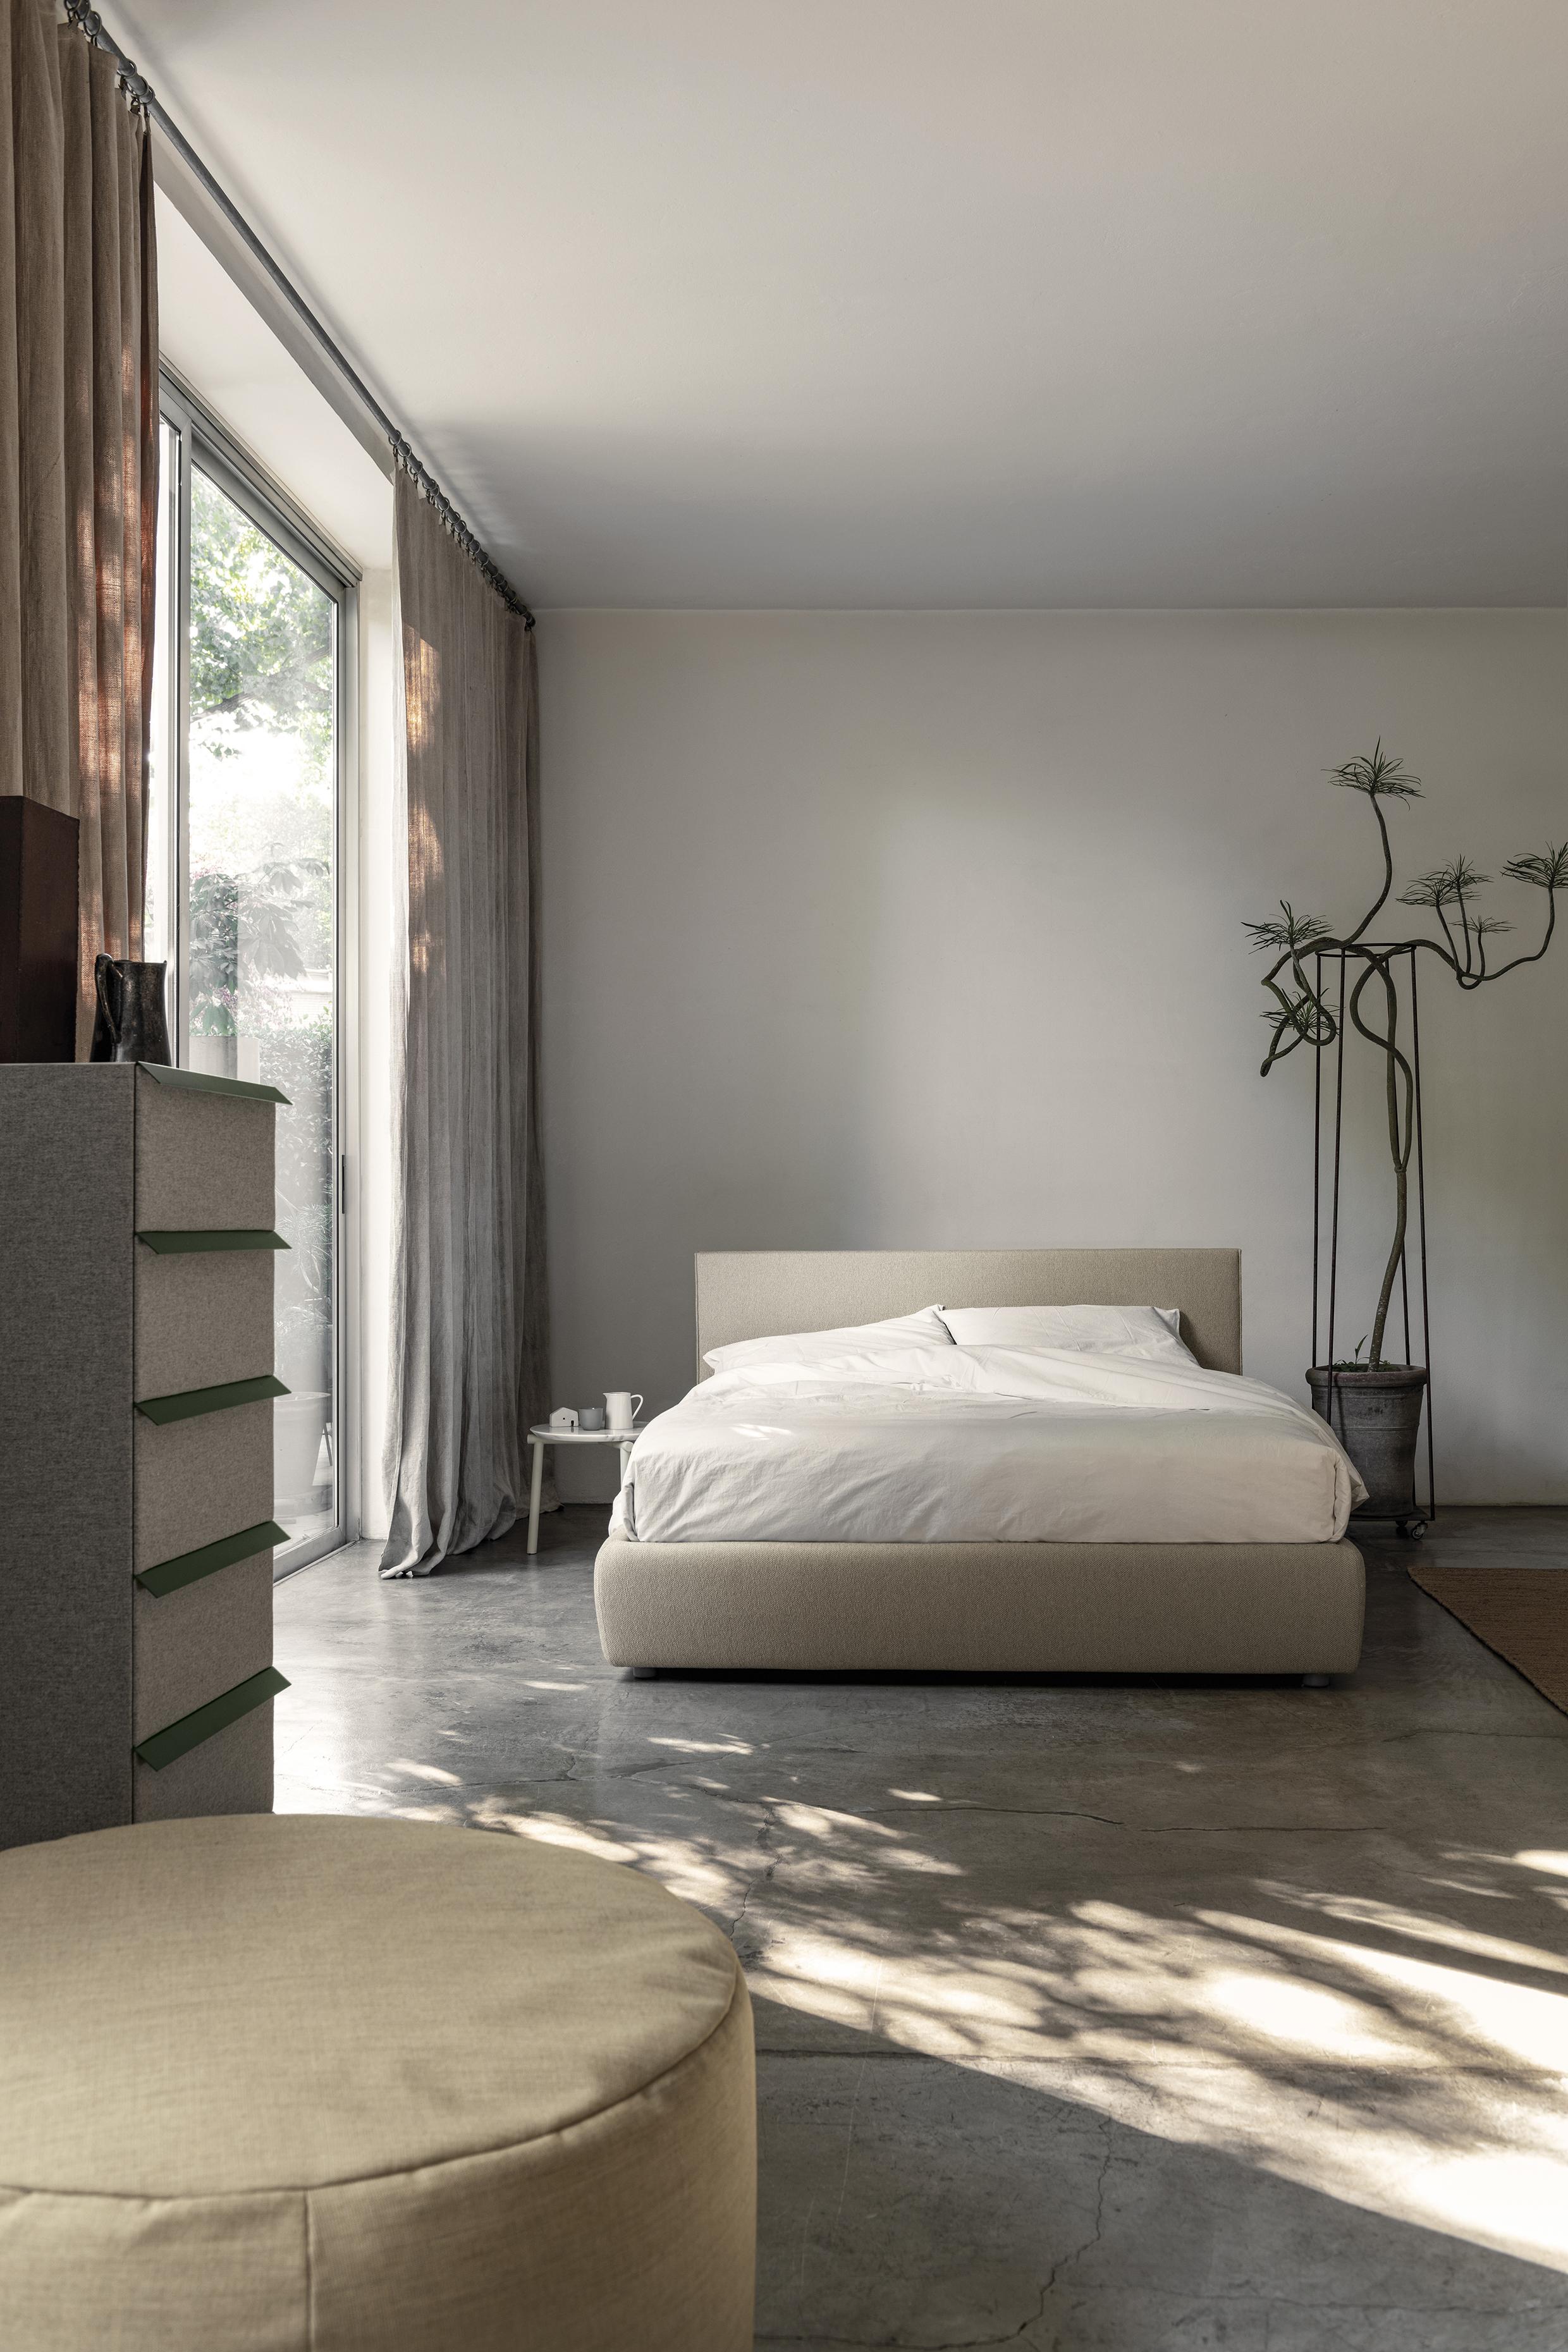 Rigorous lines conforming to every location and context, soft surfaces generating a sense of relax and warmth. Metropolitan is an essential project adjustable to multiple interpretations, thanks to the possibility to choose different bedbases and